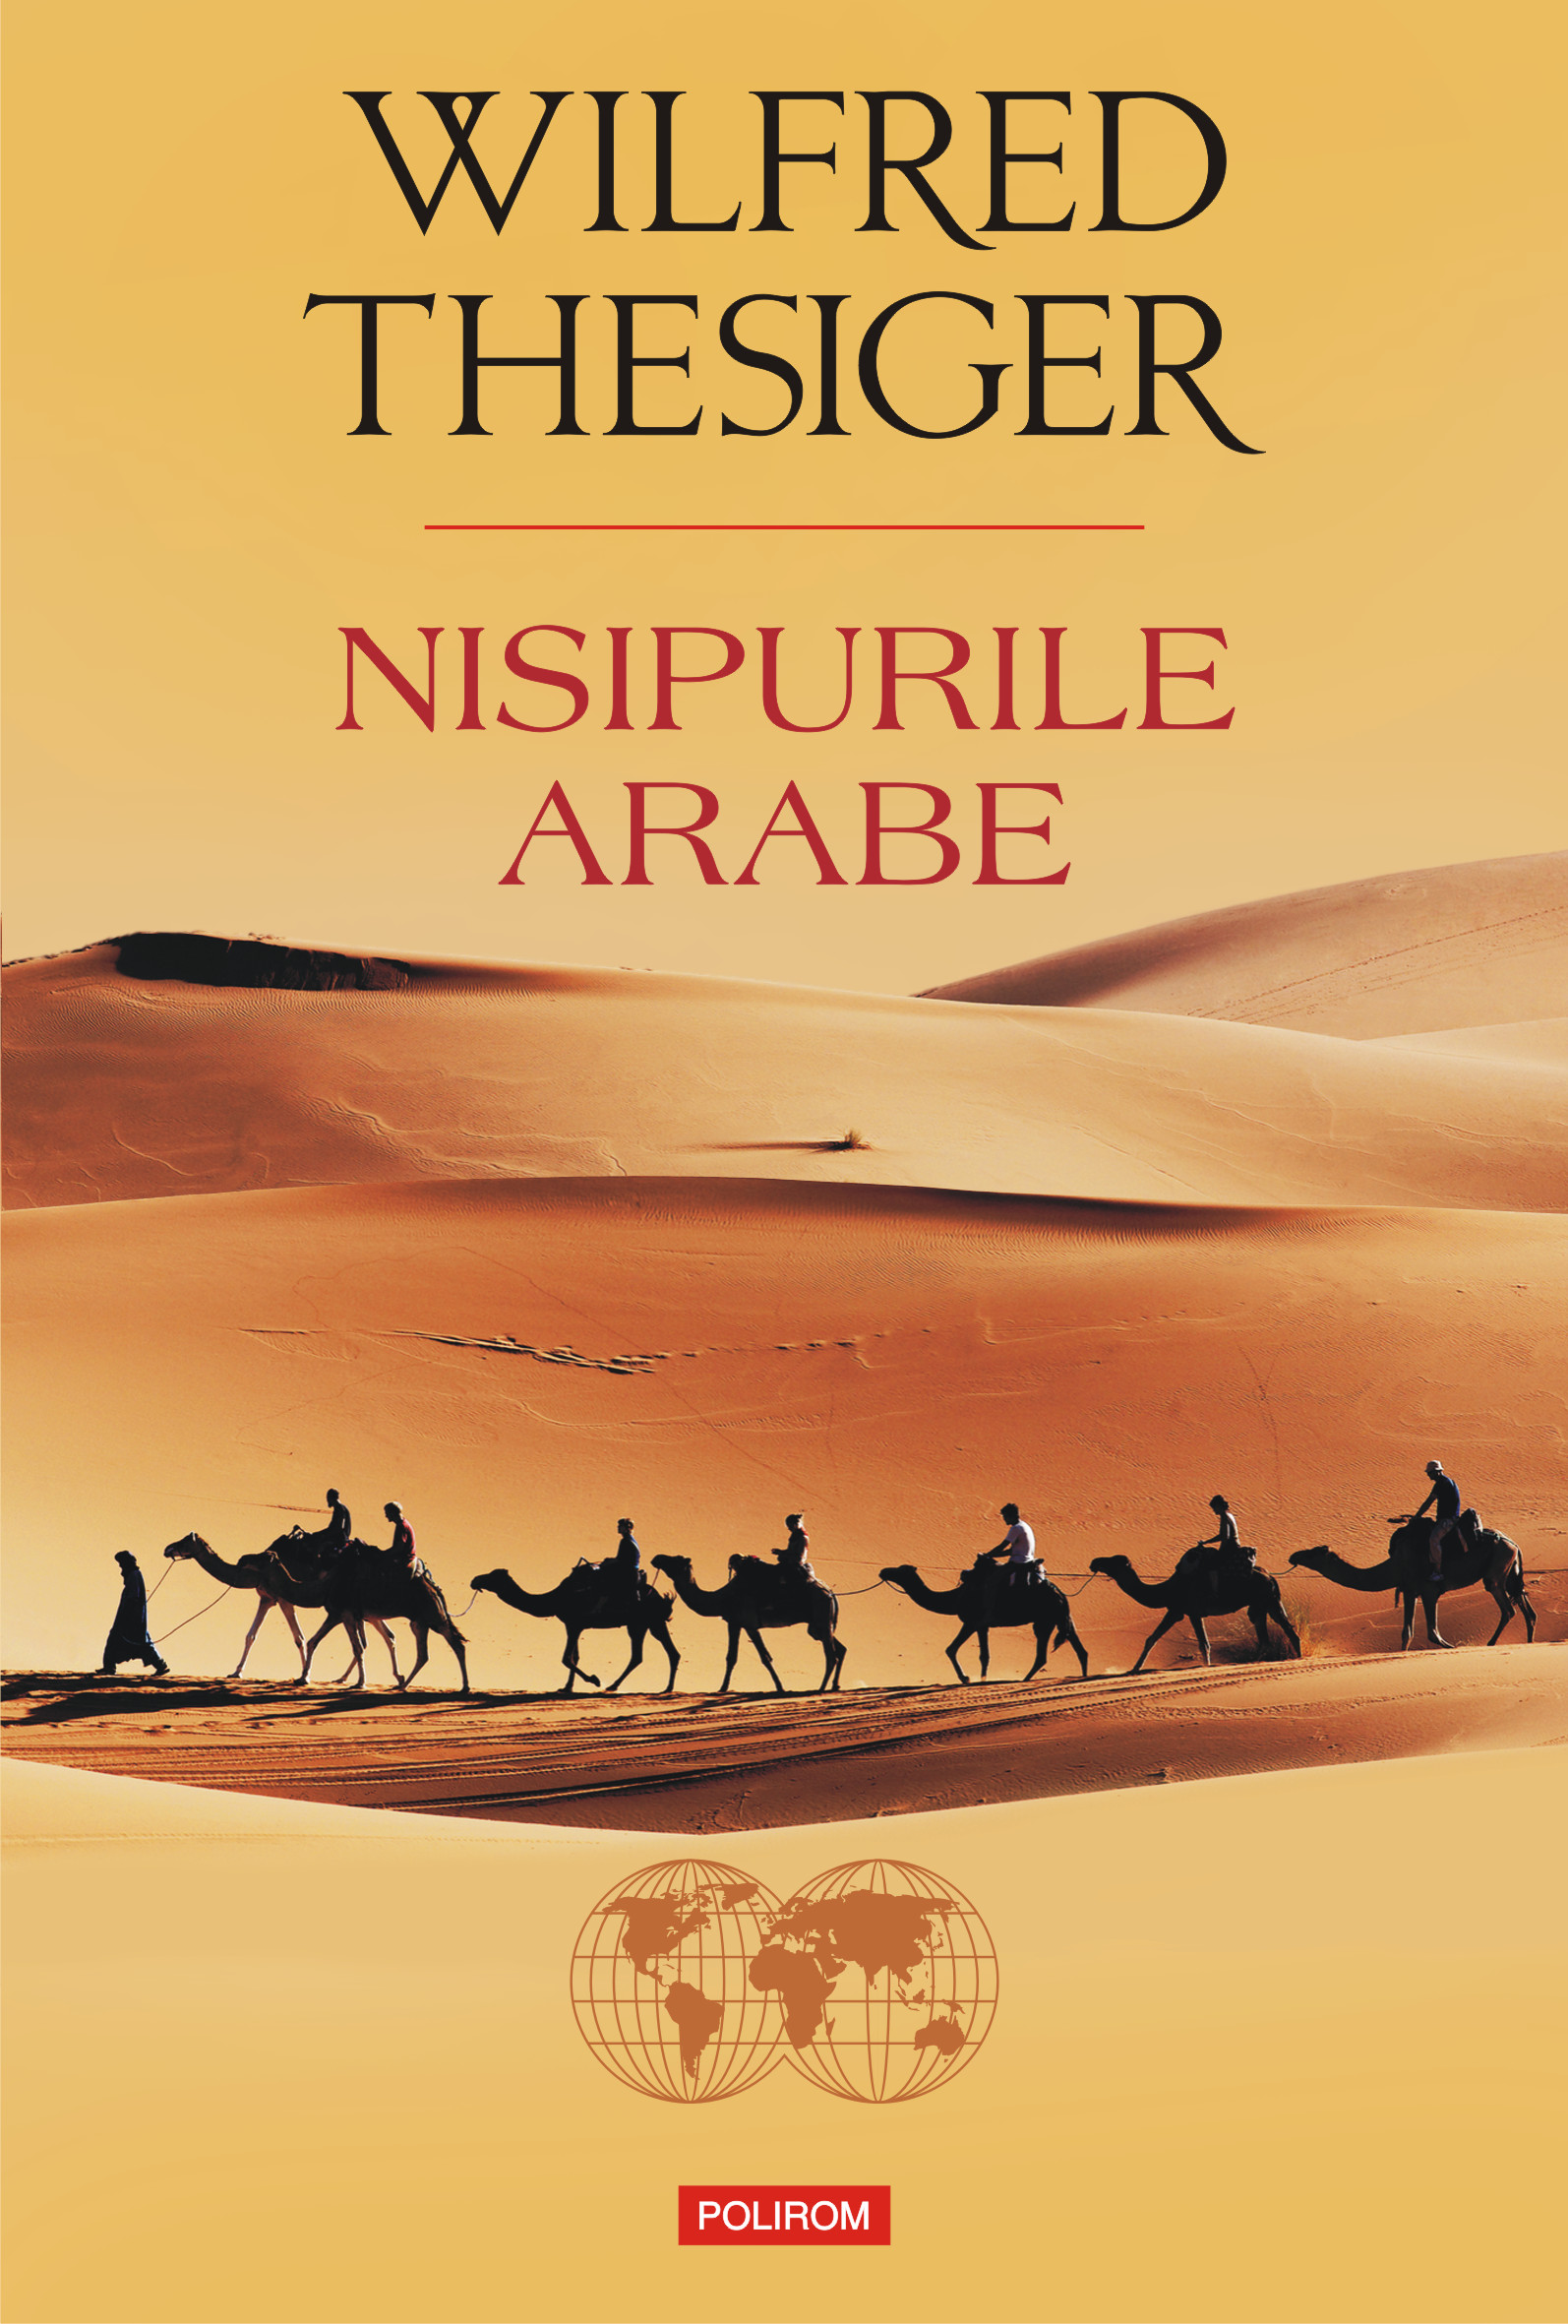 eBook Nisipurile arabe - Wilfred Thesiger